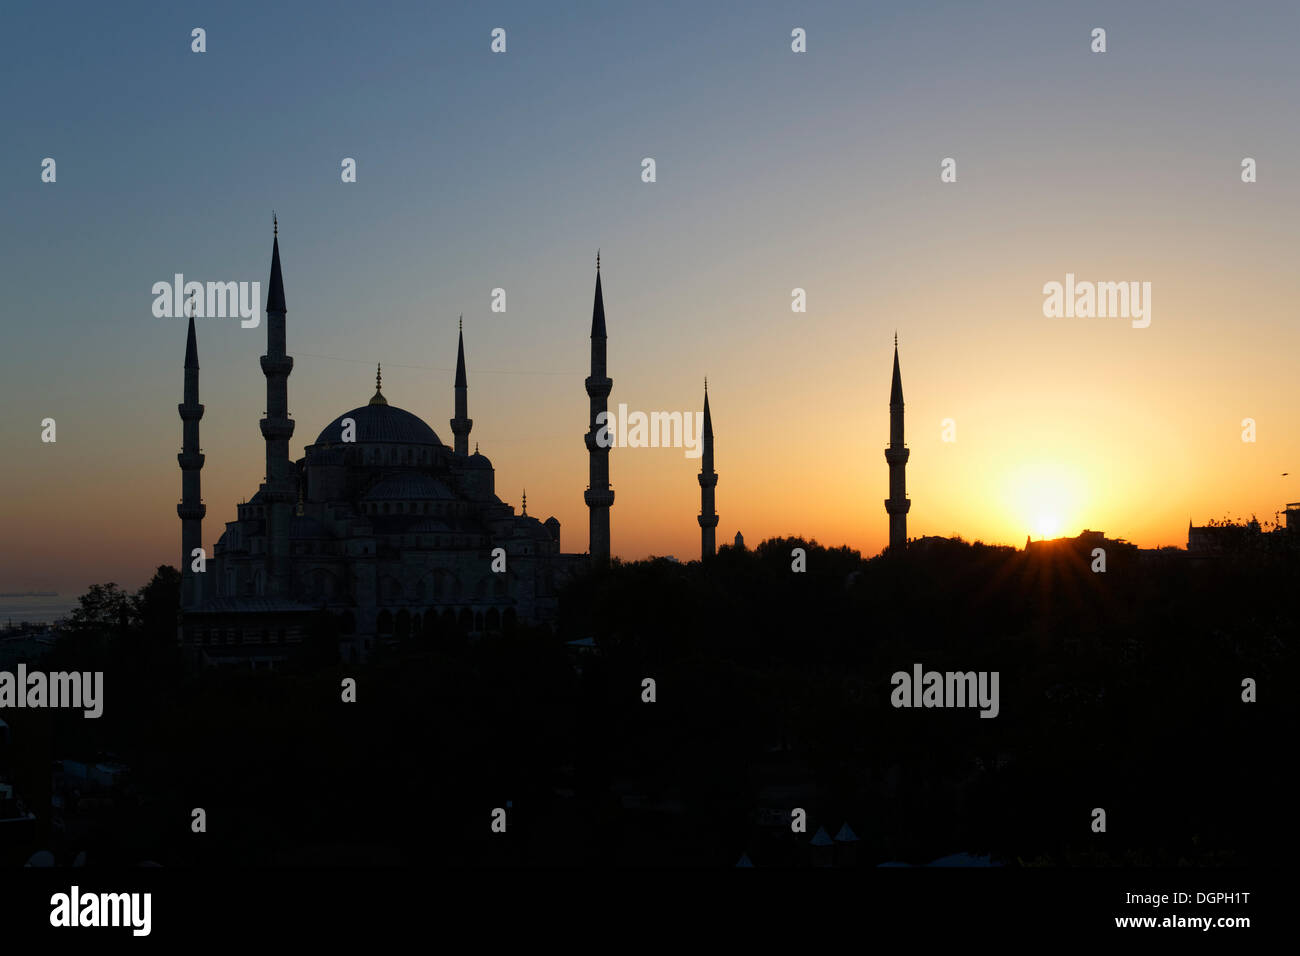 Blue Mosque, Sultan Ahmed Mosque or Sultanahmet Camii, silhouette at sunset, Istanbul, European side, Istanbul Province, Turkey Stock Photo